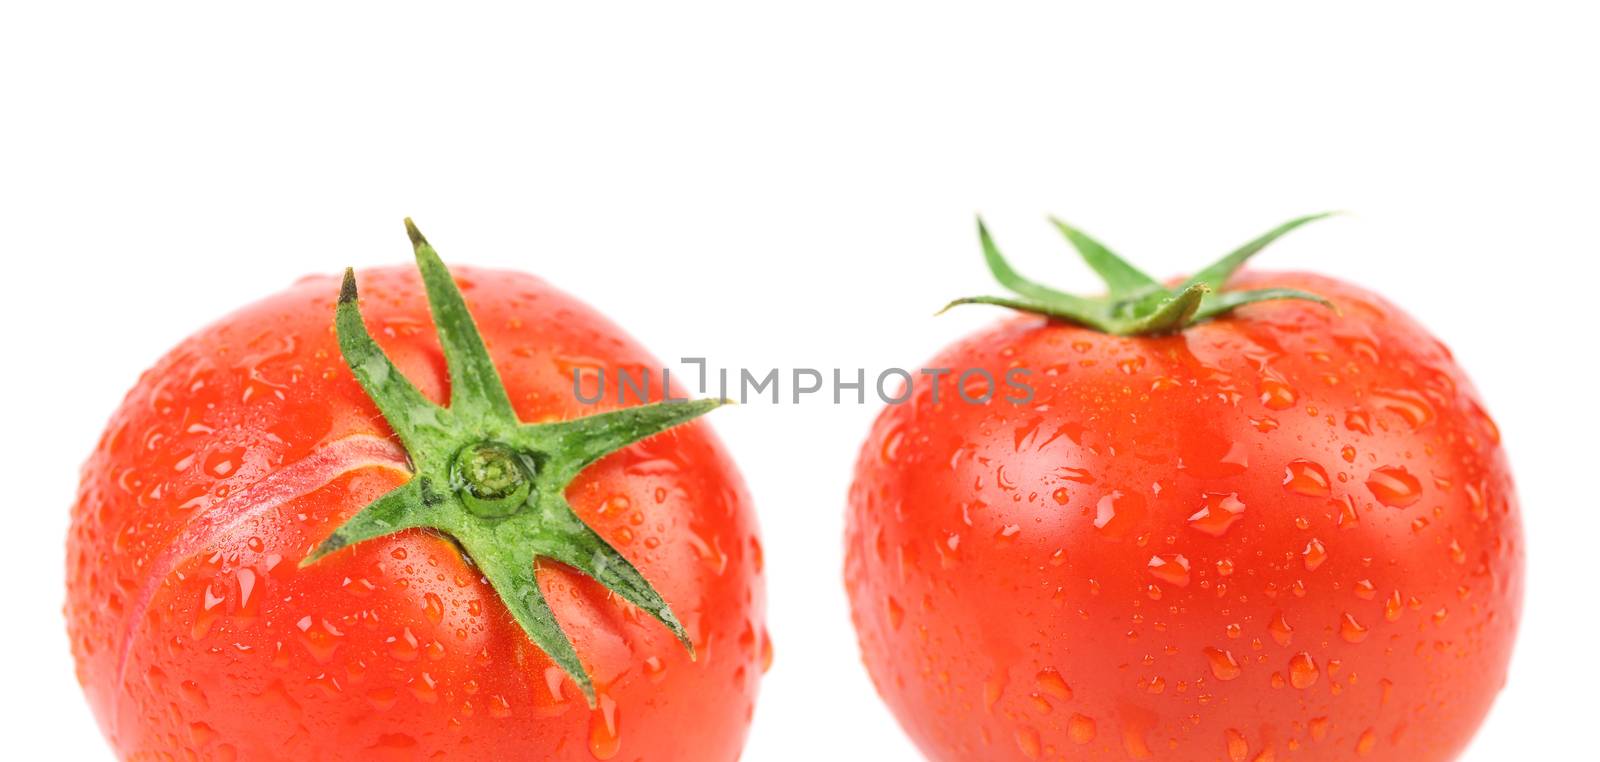 Two tomatoes with water drops. by indigolotos